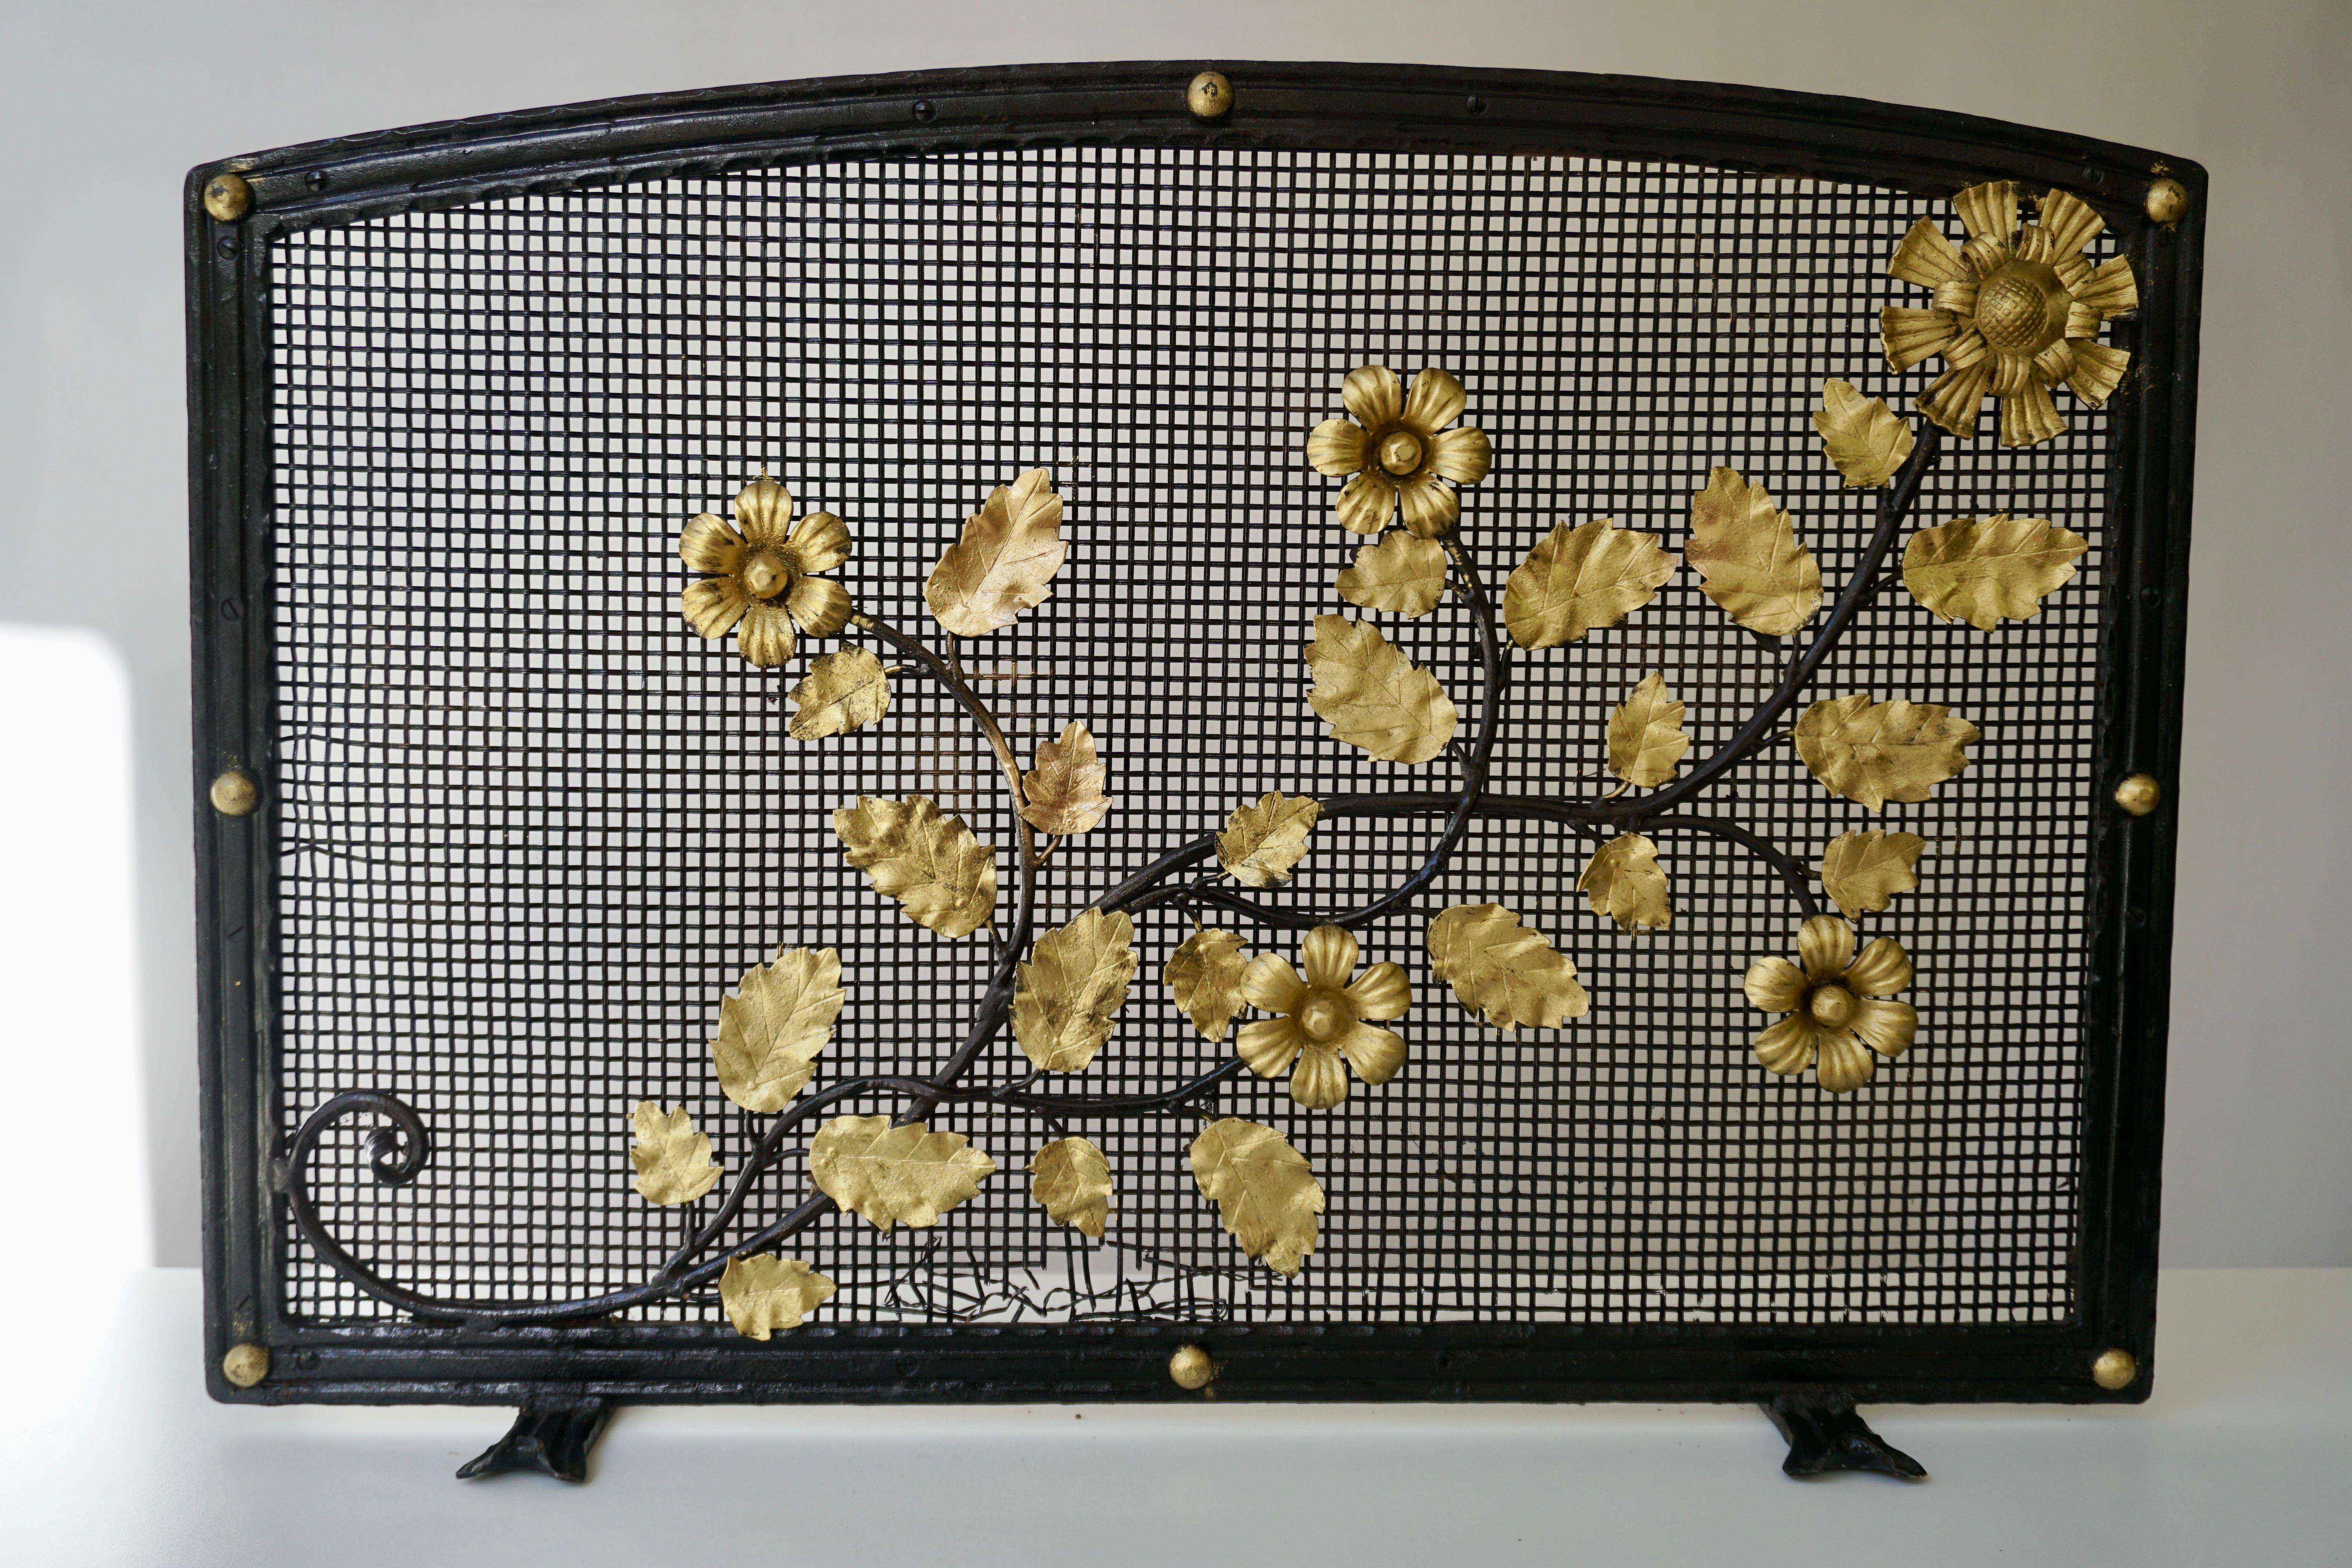 Fire screen with scattered golden flowers mounted on black metal rods. Mesh backing makes these an excellent choice for wood-burning fireplaces. 
Custom inquiries welcome.

Weight 7kg.